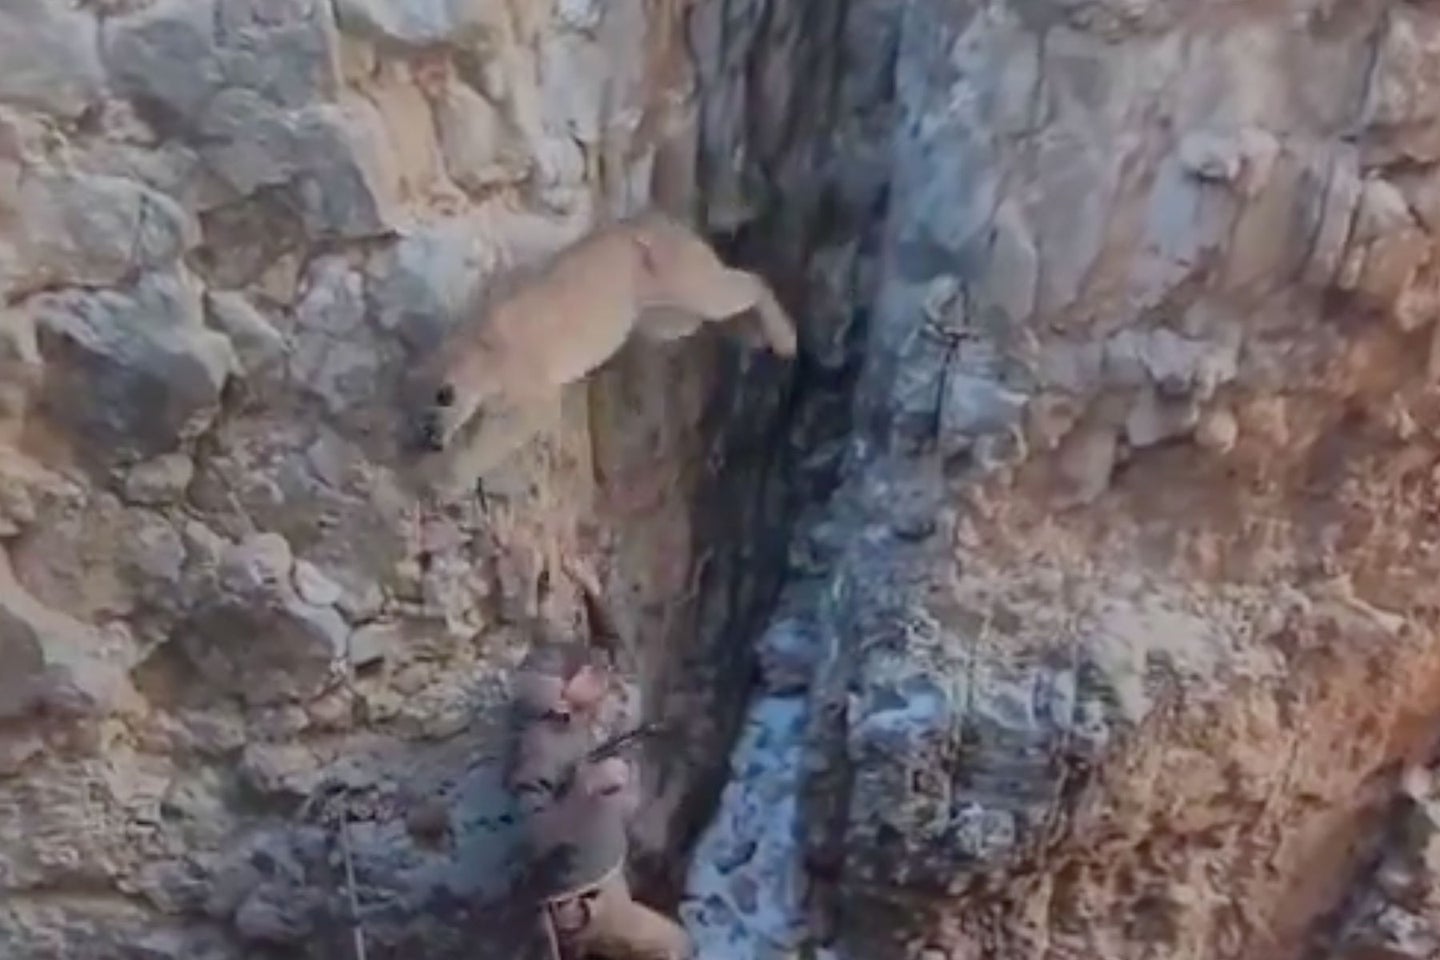 Mountain lion lunges out of a slot canyon over the head of a scientist.